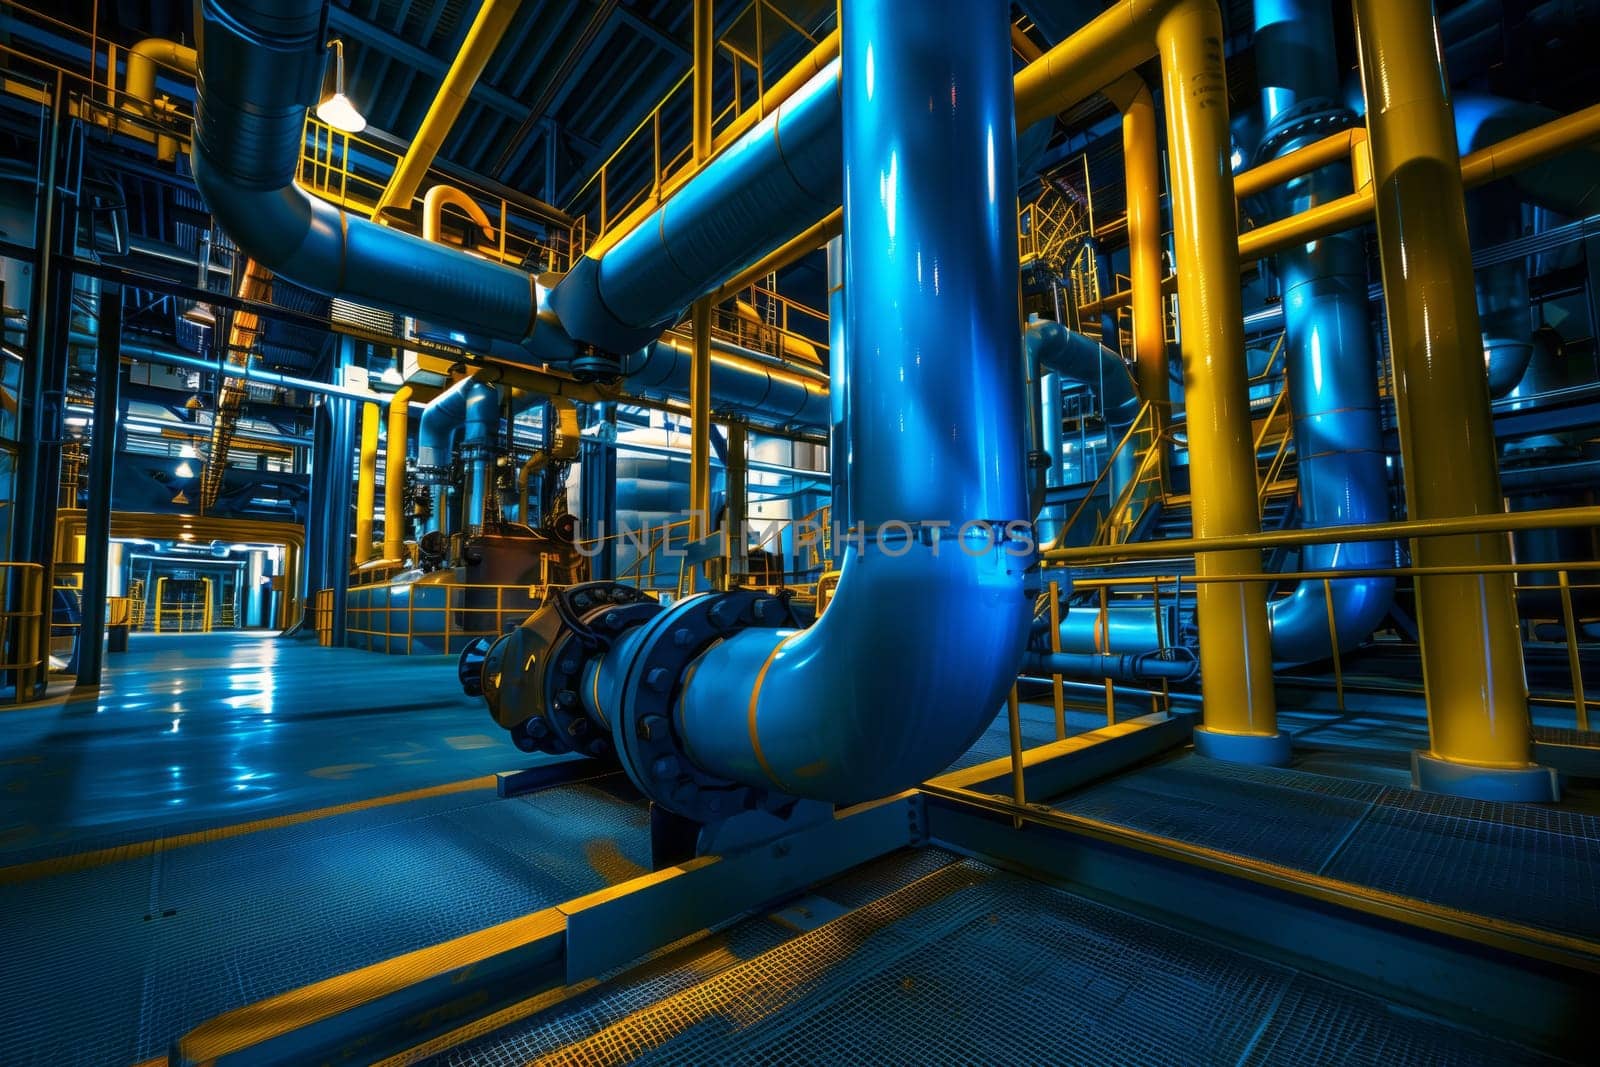 A factory with a network of blue and yellow pipes for water, gas, and electricity. The engineering marvel showcases symmetry and steel casing pipes